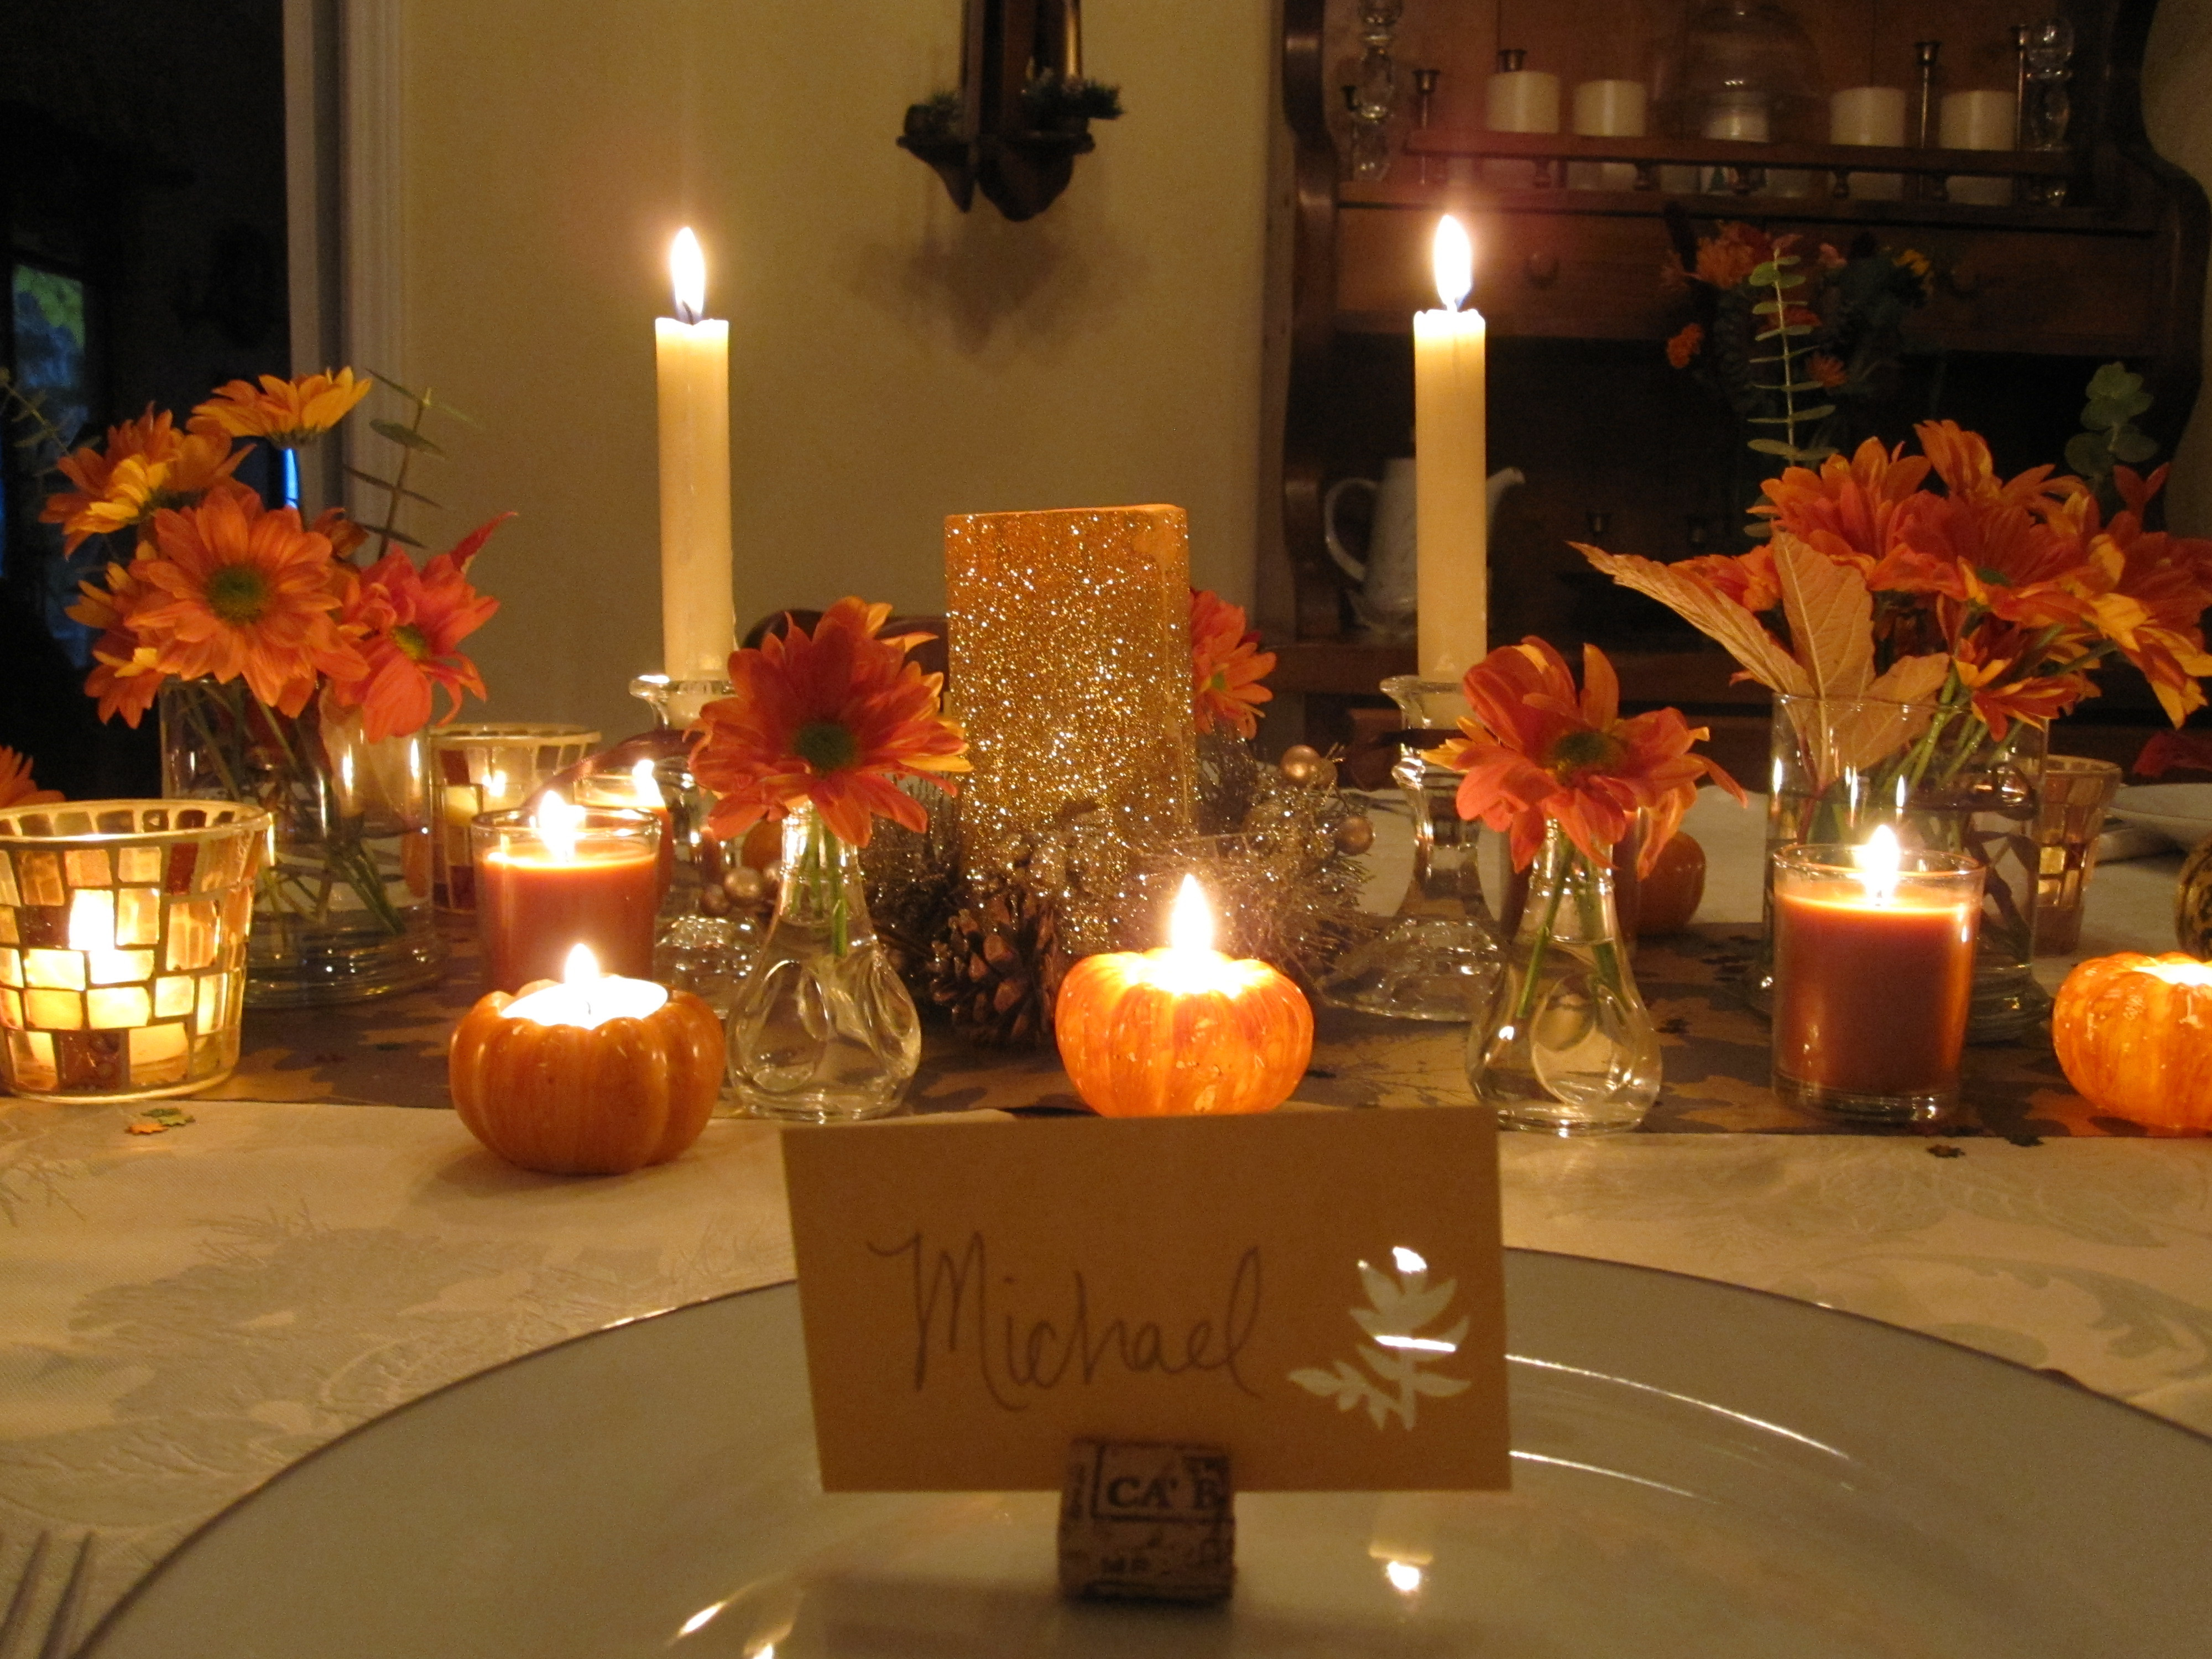 Thanksgiving Table Decorations Ideas
 My Thanksgiving Table